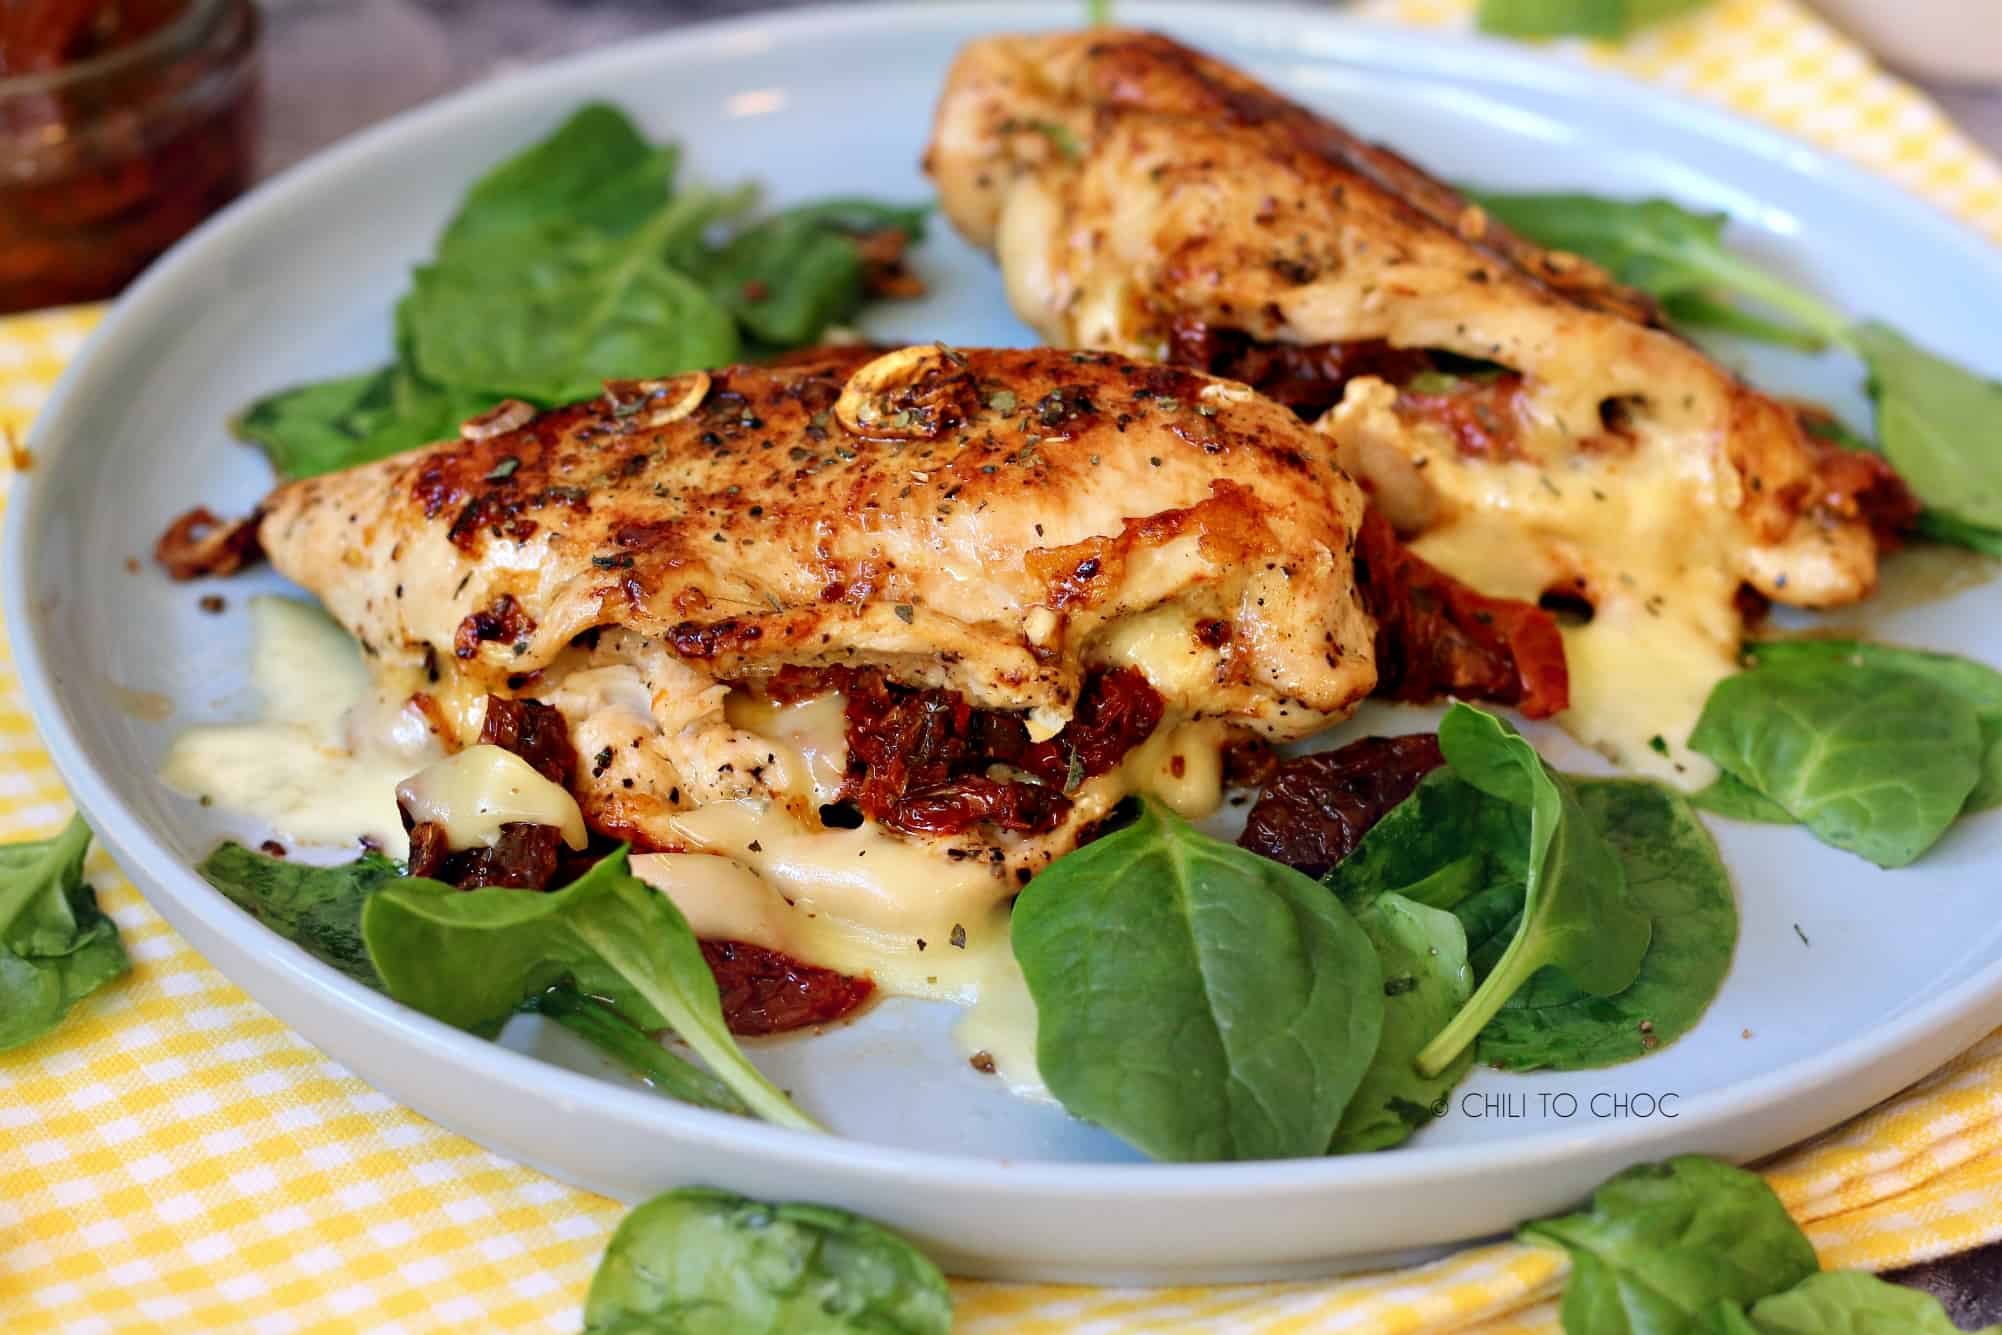 Stuffed chicken with sundried tomatoes, Gouda and baby spinach